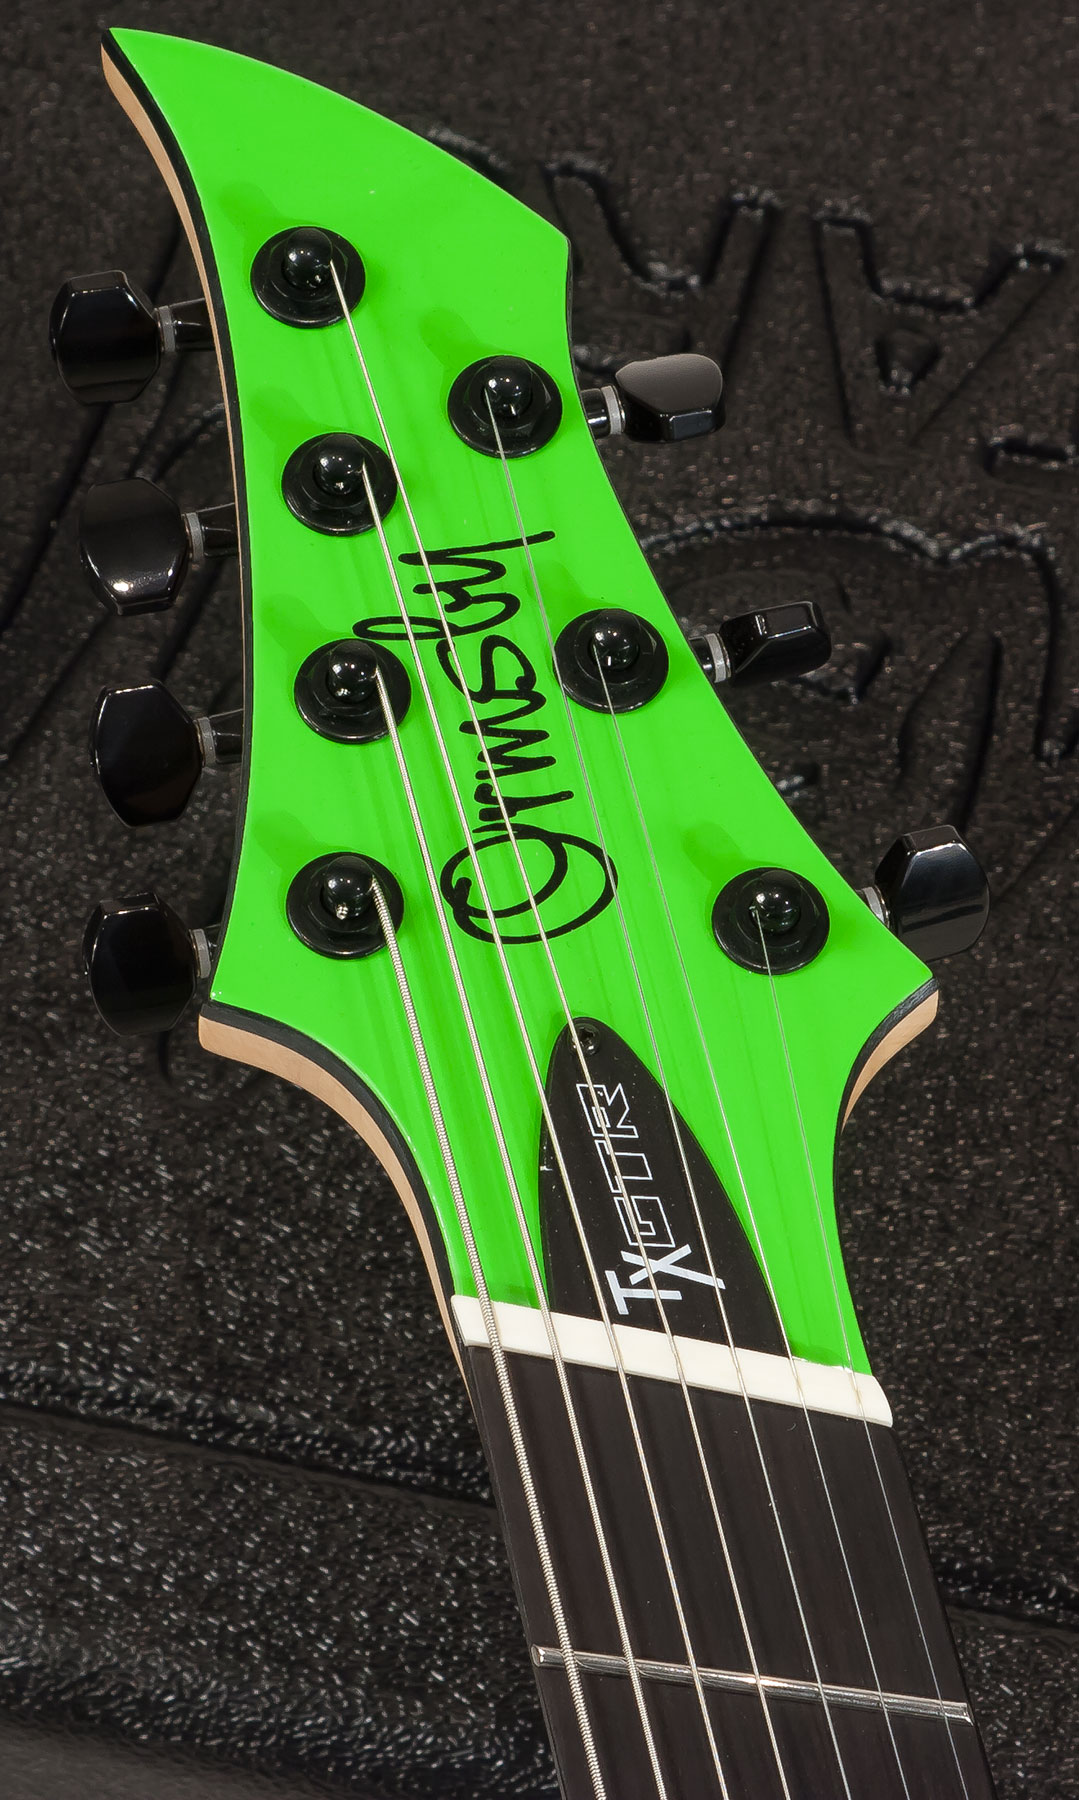 Ormsby Tx Gtr 7 Hs Ht Eb - Chernobyl Green - Multi-Scale Guitar - Variation 4